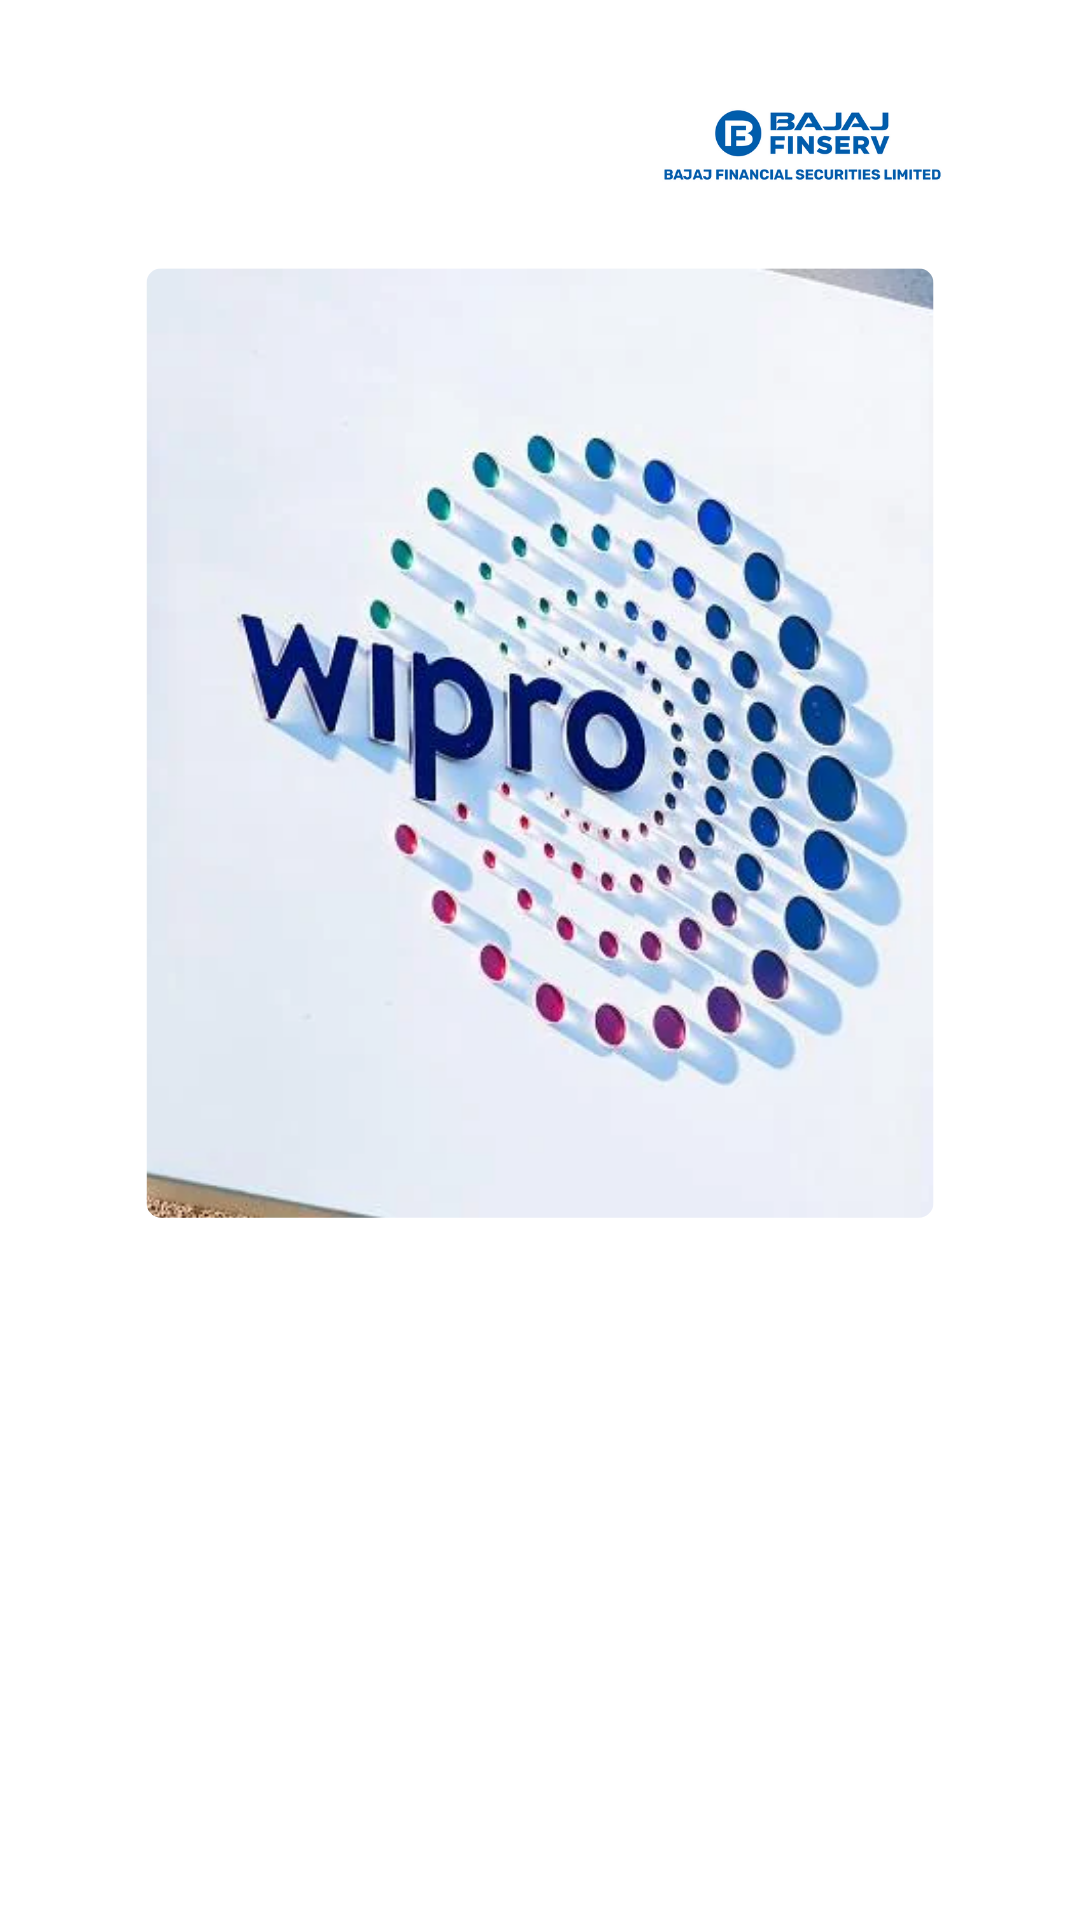 Wipro png images | PNGWing